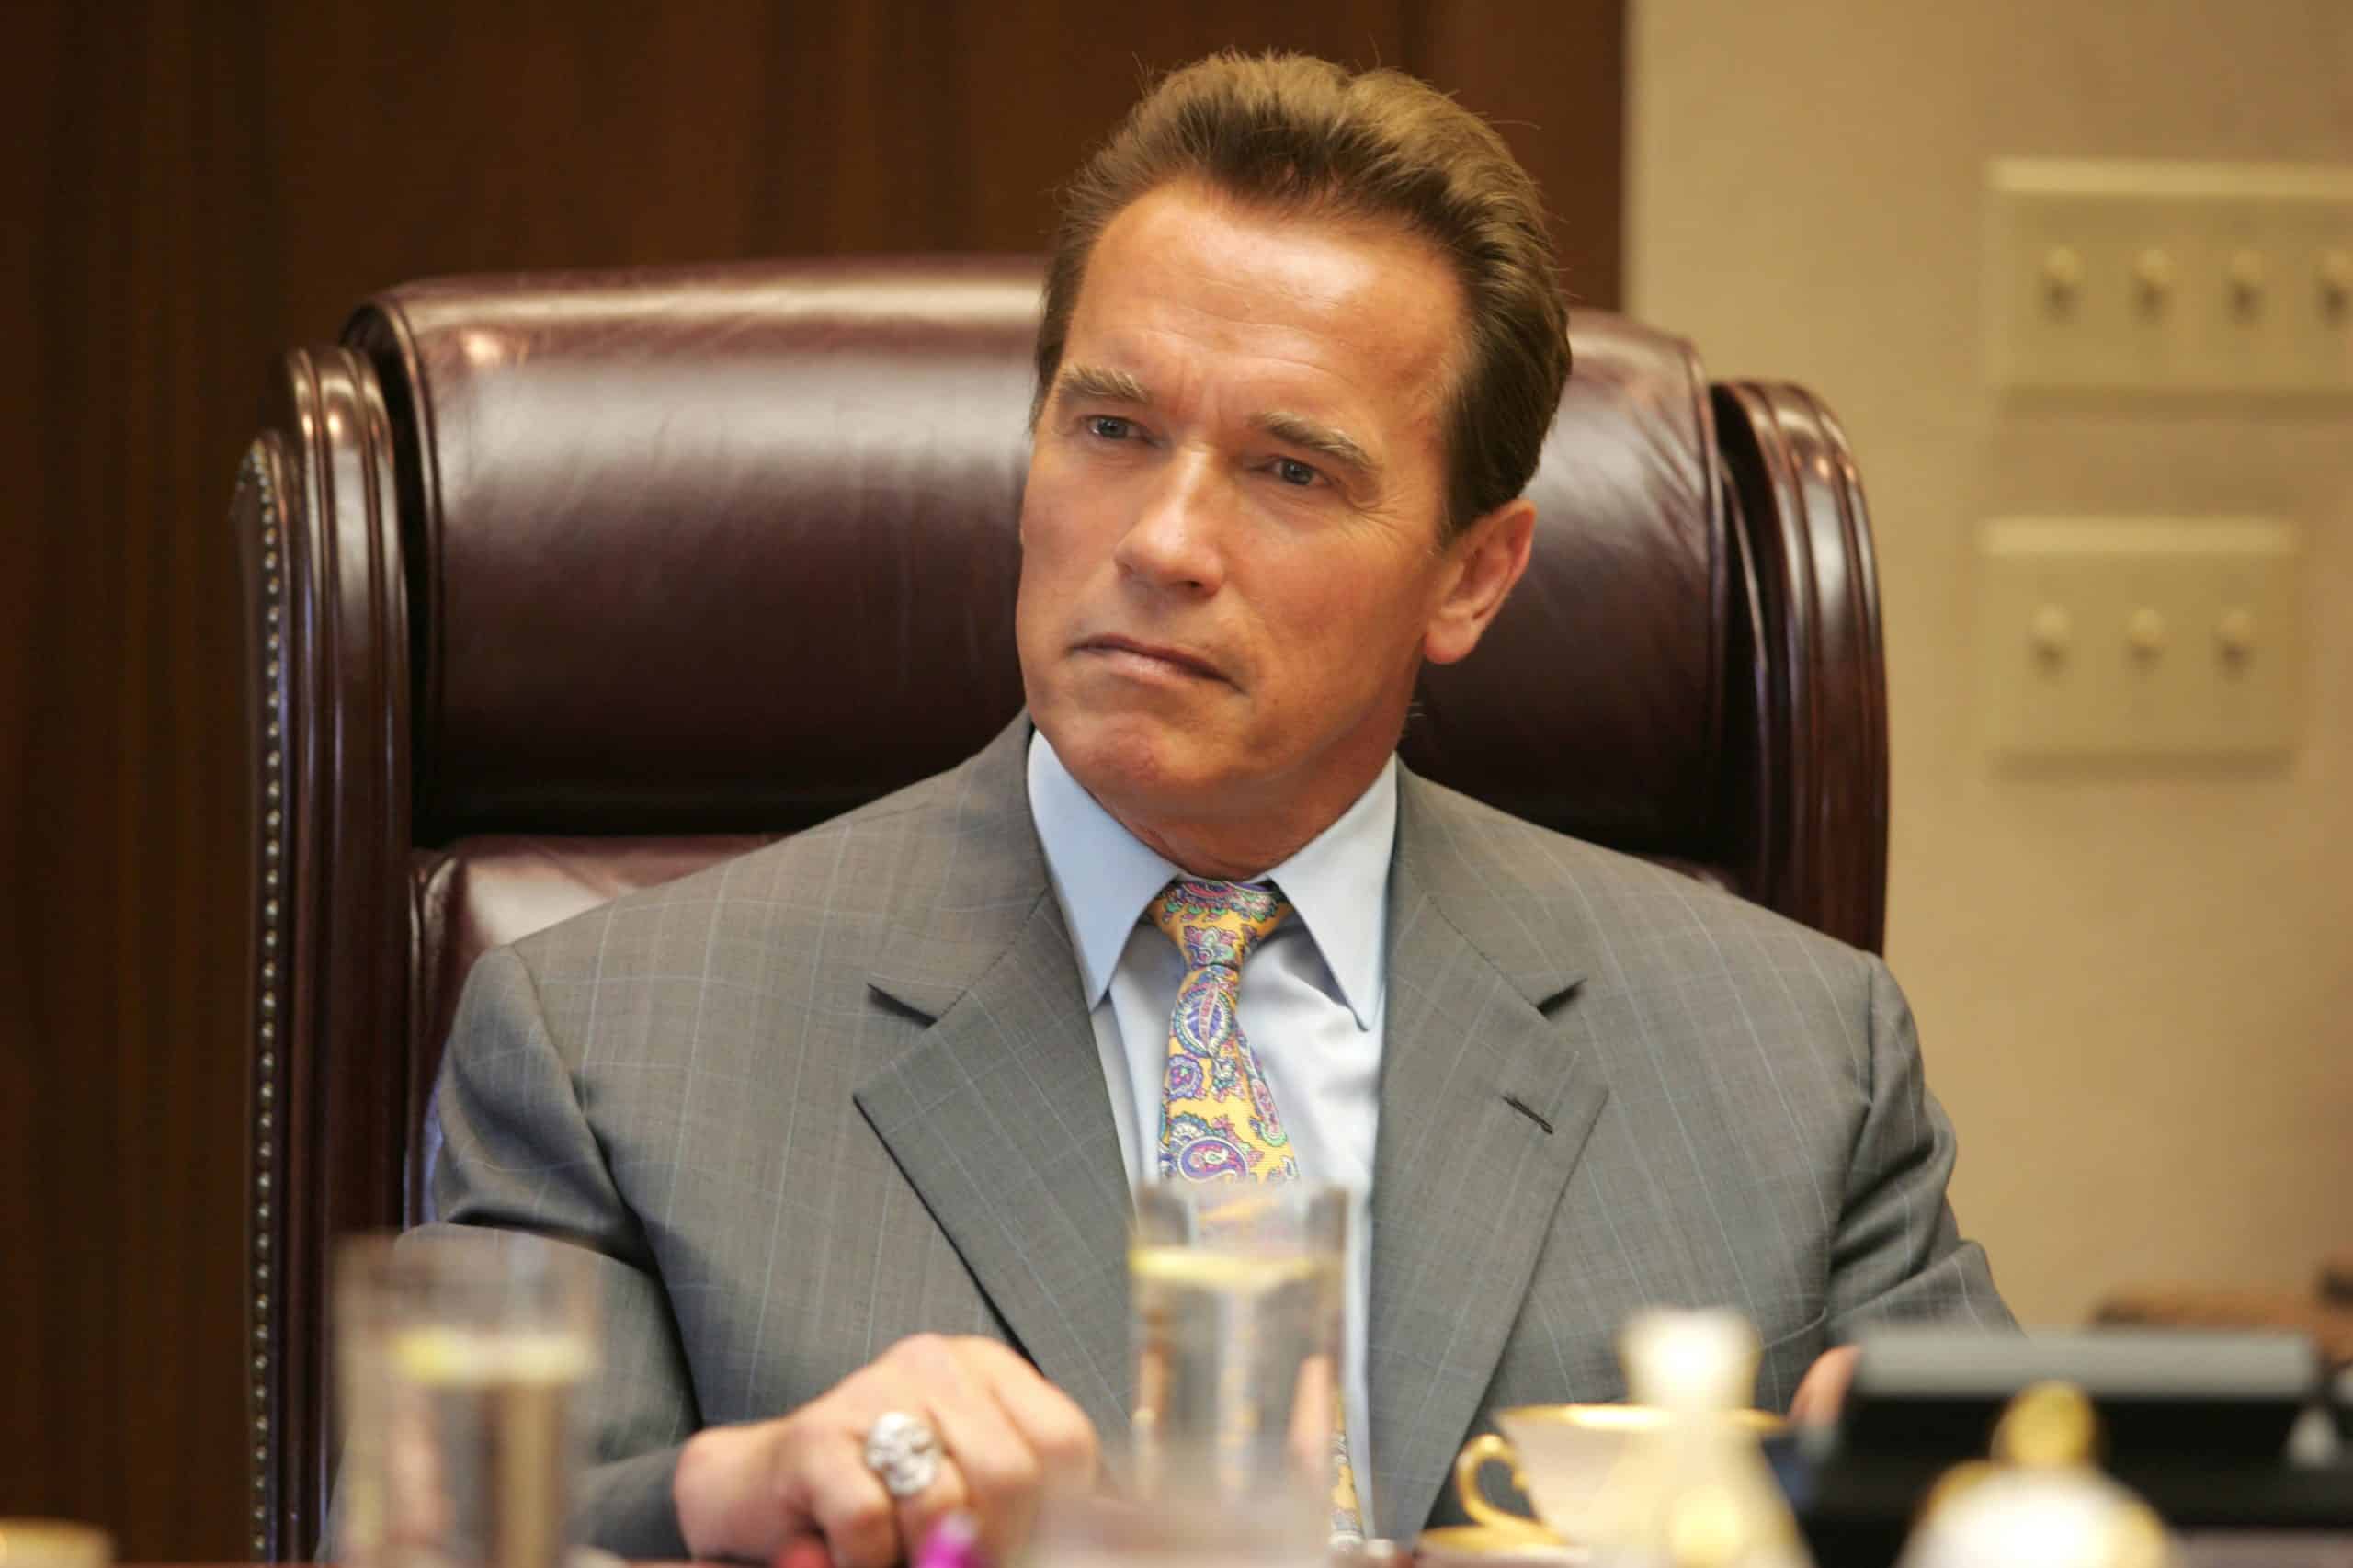 THE APPRENTICE, Governor Arnold Schwarzenegger, 'Soap Gets In Your Eyes'